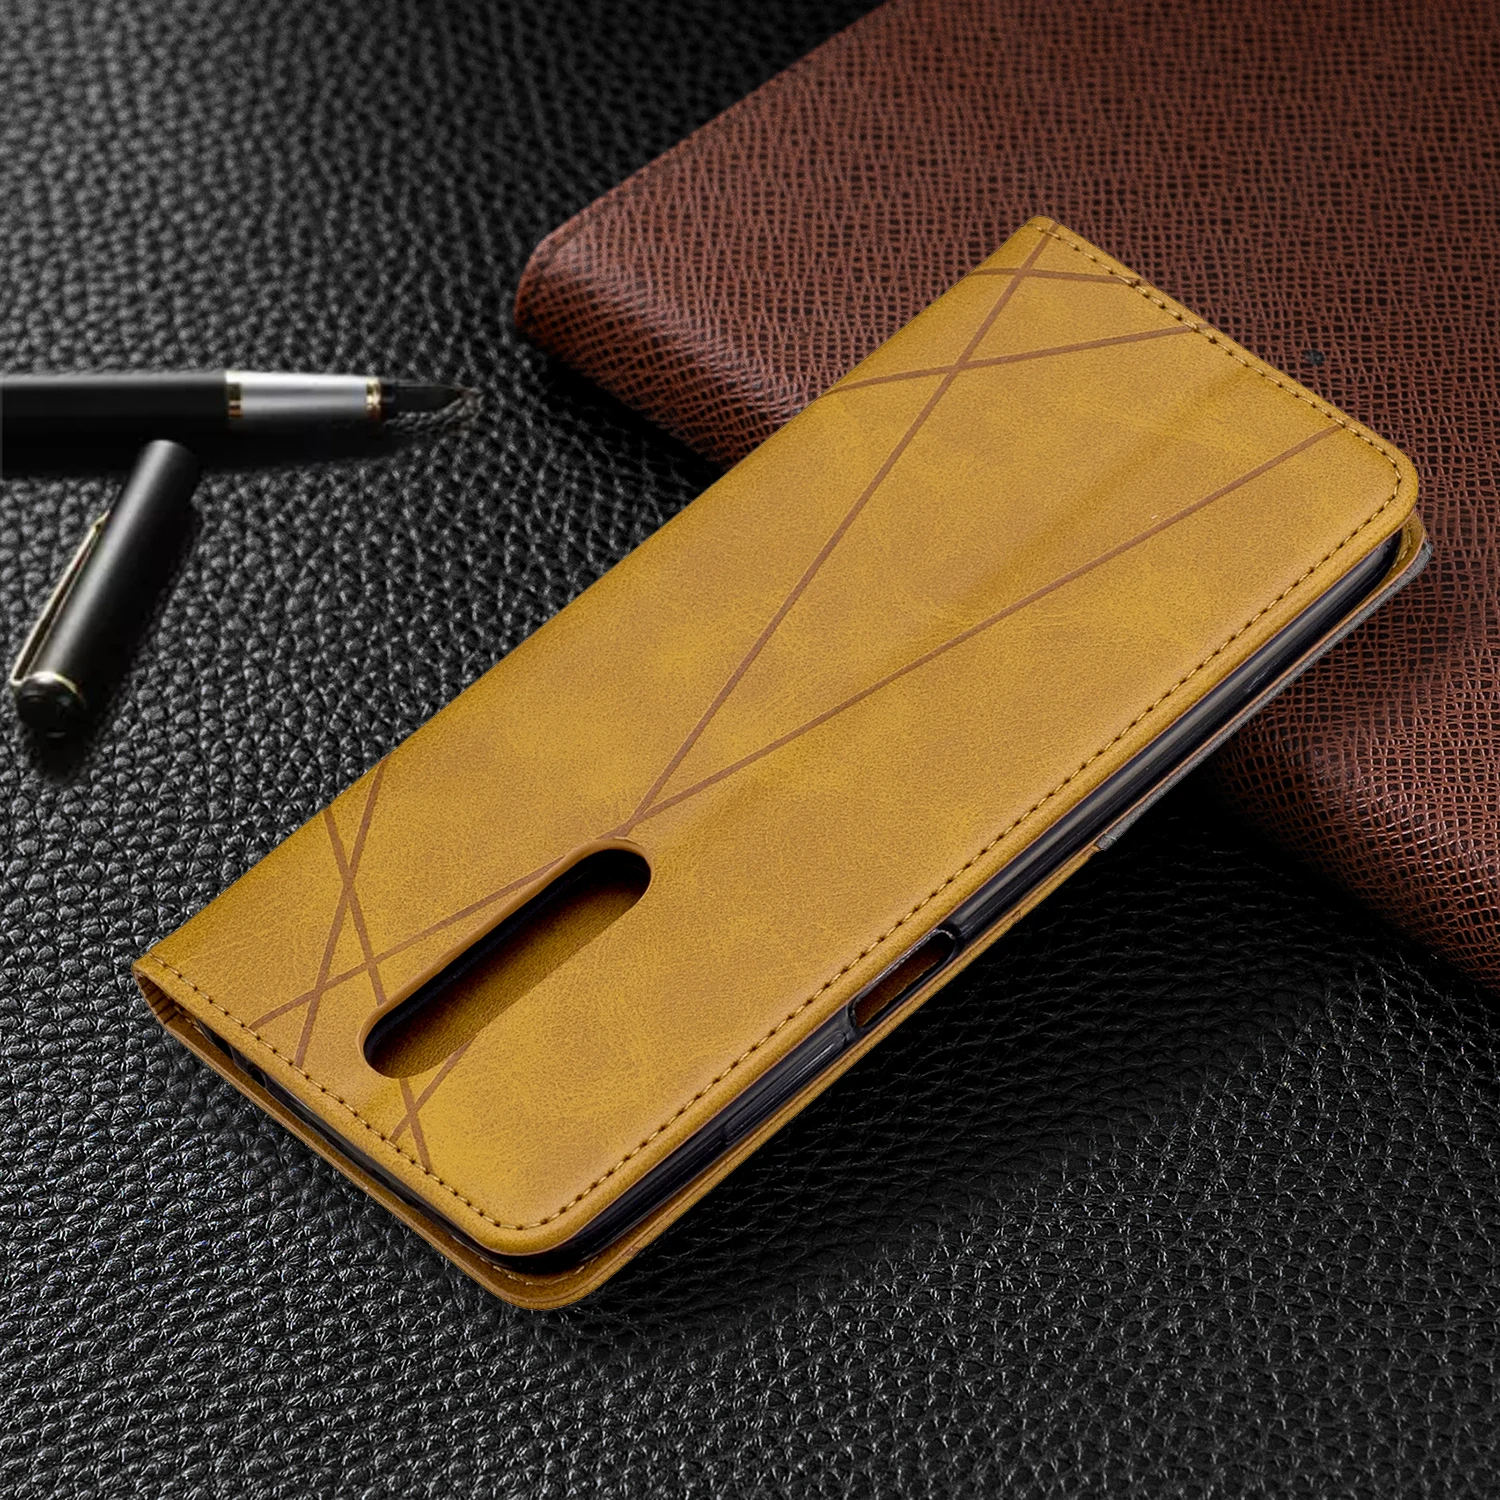 Magnetic Flip Leather Case For Xiaomi Redmi 7 7A 8 8A 9 9A 9T 10 10X Wallet Card Cases For Redmi Note 7 8 8Pro 8T Note9 9Pro Max xiaomi leather case charging